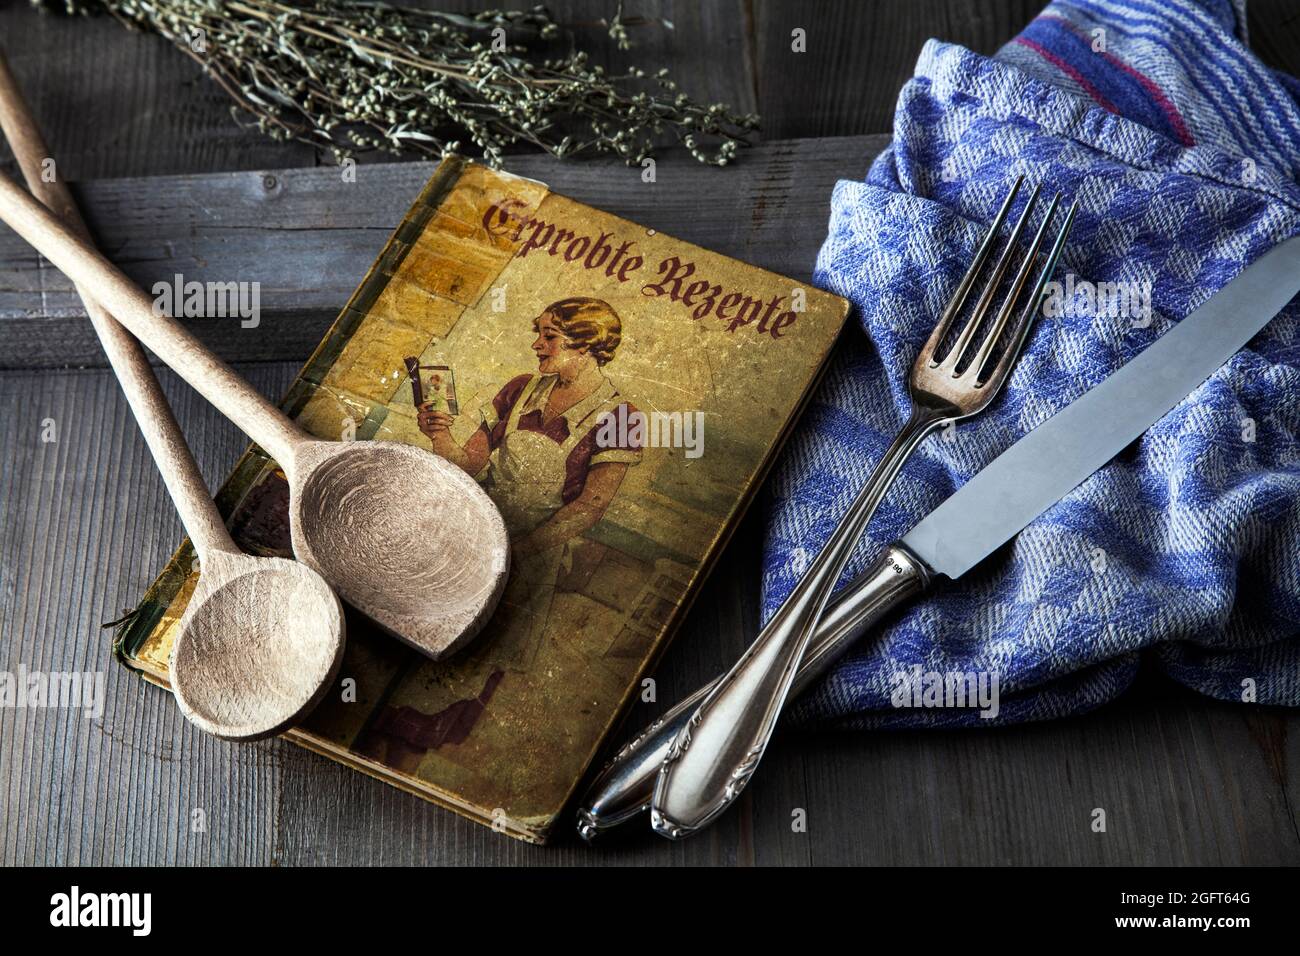 antique cookbook with wooden spoon and cuterly Stock Photo